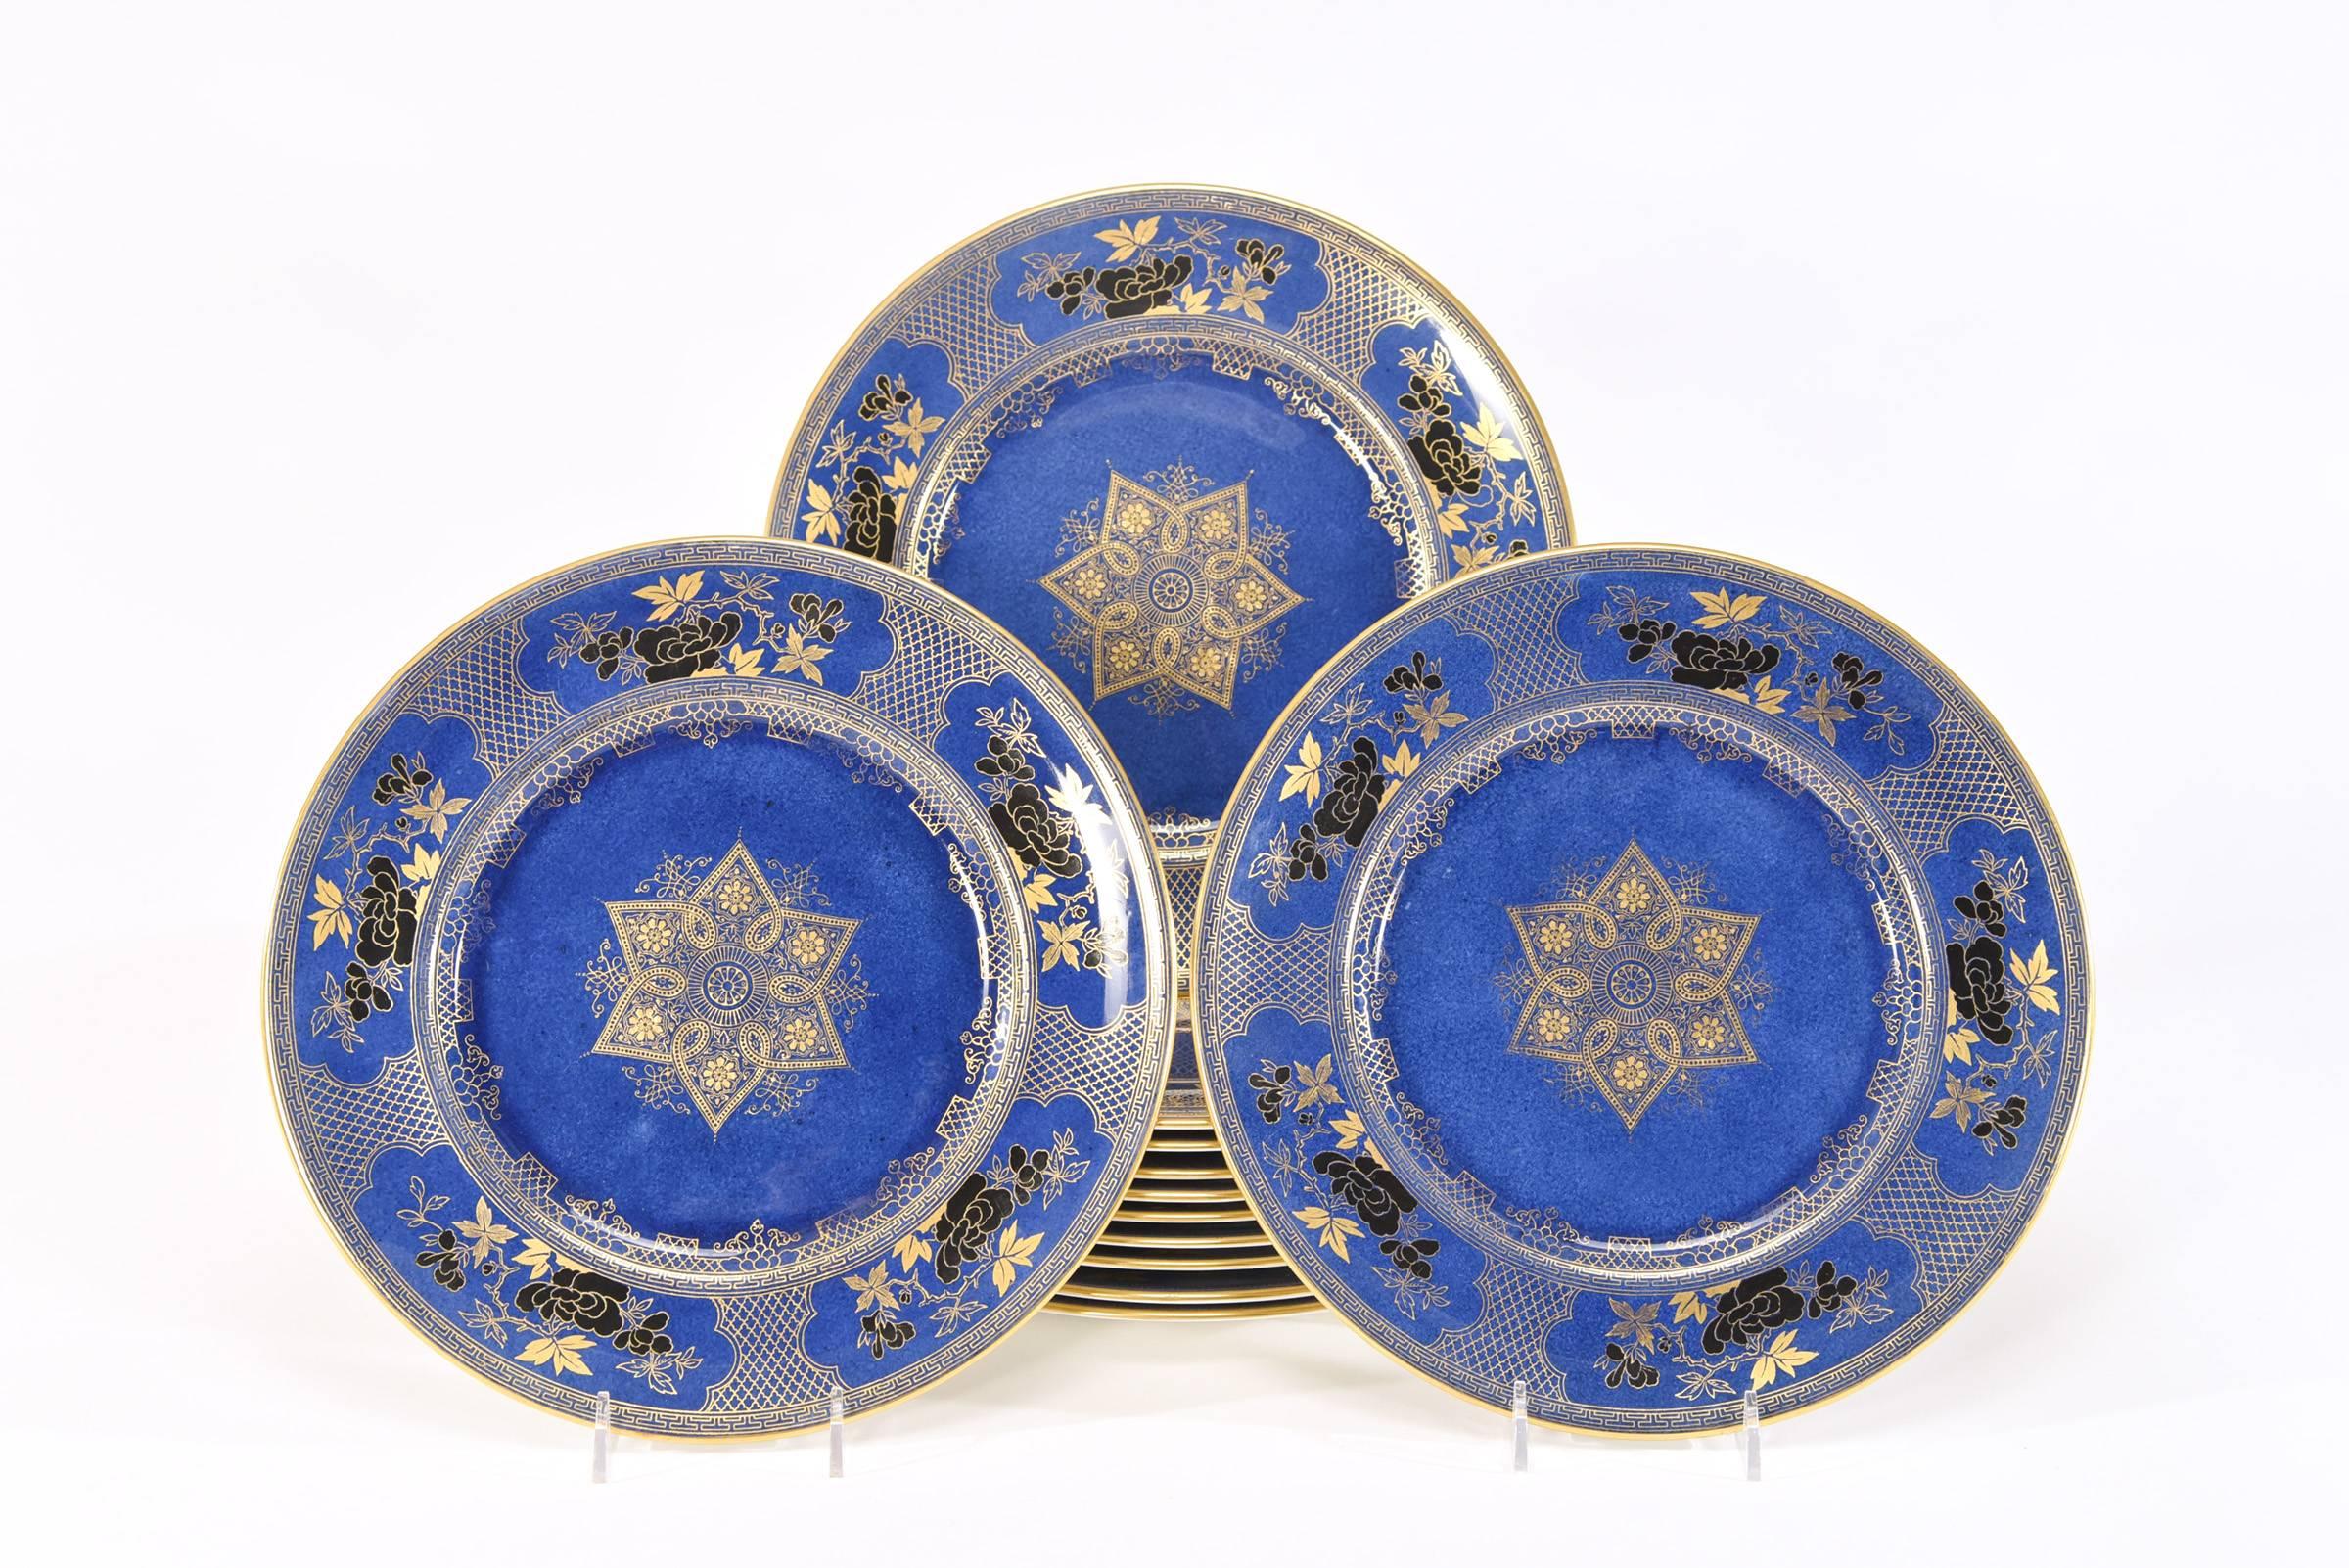 This set of 12 Royal Doulton capture the essence of the Japonism decorative elements with the Aesthetic Movement motif. Five reserves encircle the border with black and gold enamels alternating with a gold latticework on a lapis blue ground. The